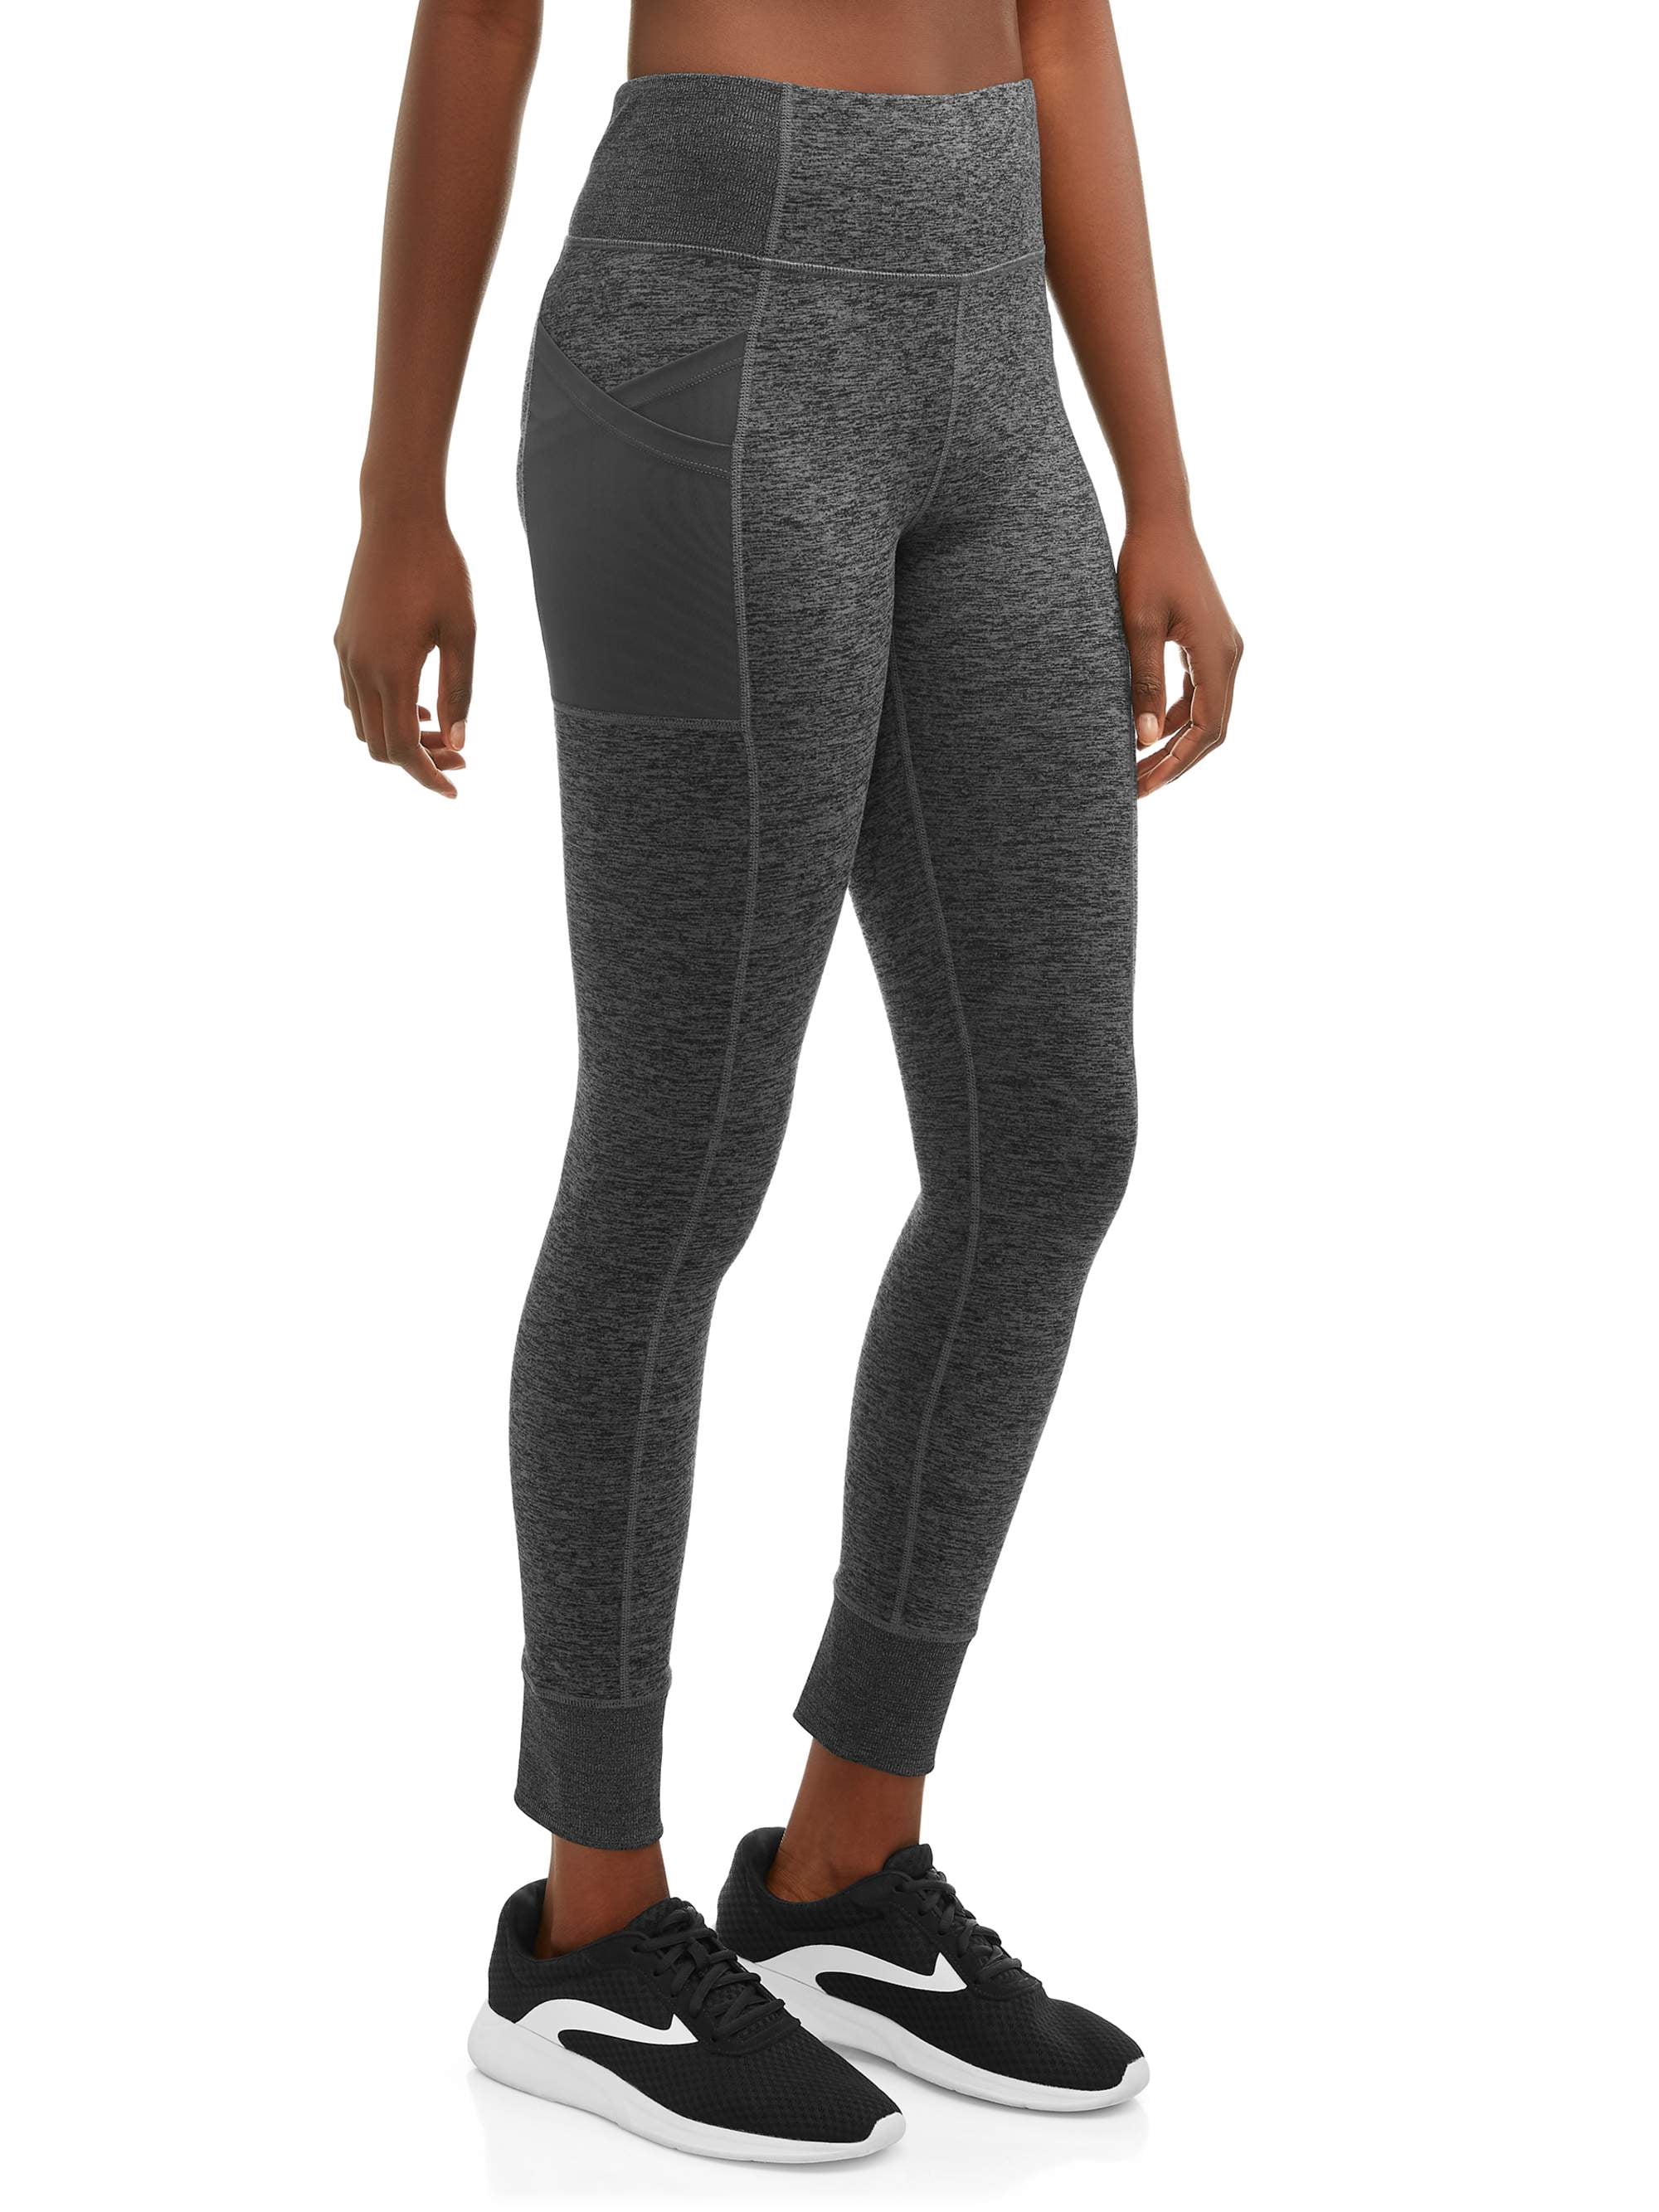 Women's Active High Waisted Workout Leggings with Side Pocket 